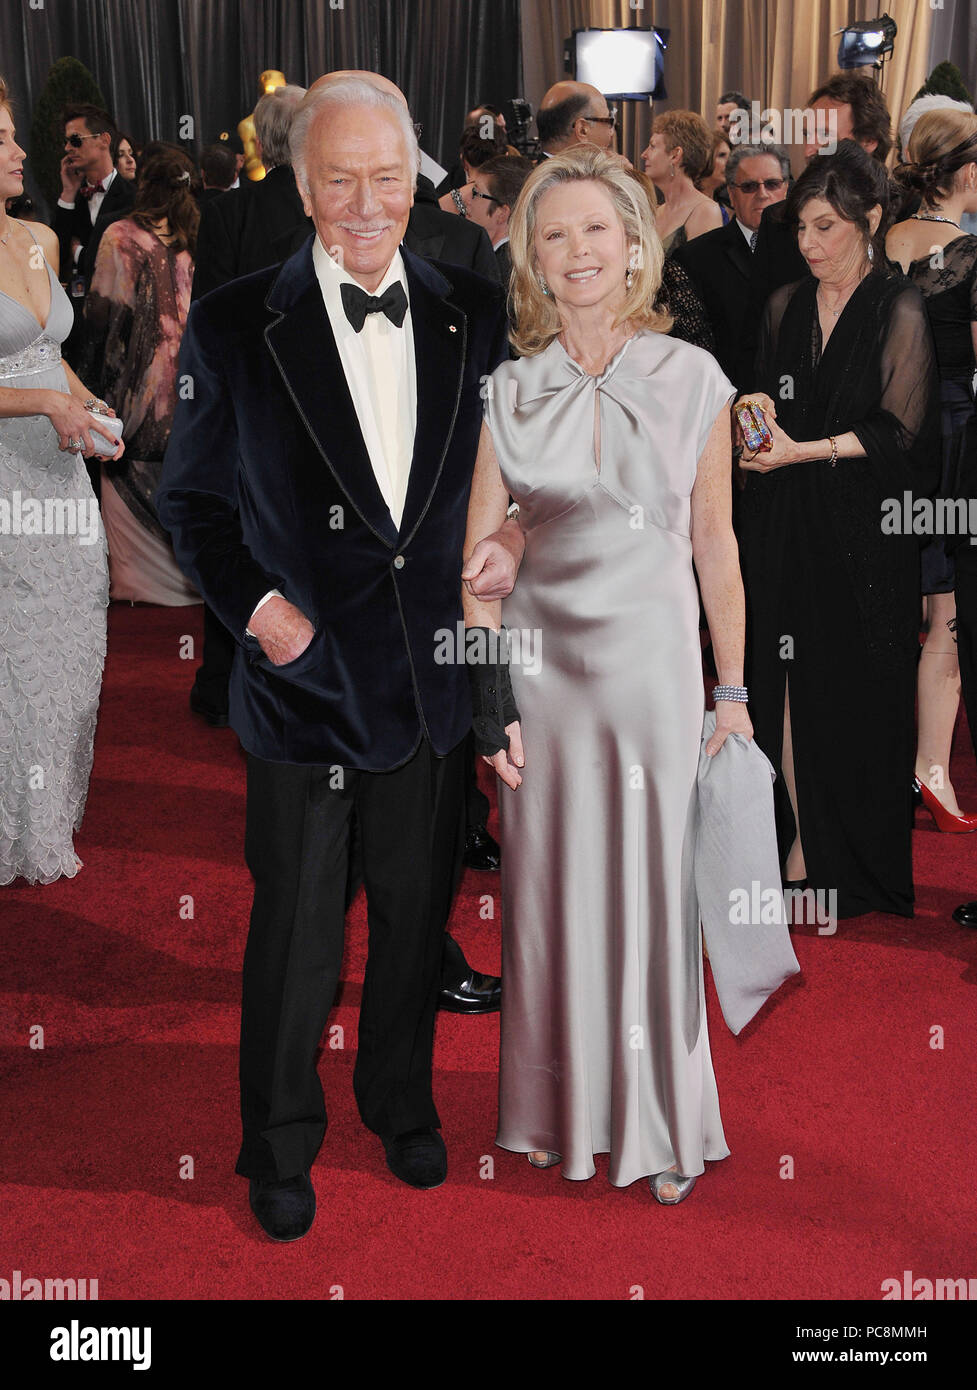 Christopher Plummer and wife  223  arriving at the Oscar - 84th Academy Awards  - 2012 at the Hollywood and Highland Theatre in Los Angeles.Christopher Plummer and wife  223 ------------- Red Carpet Event, Vertical, USA, Film Industry, Celebrities,  Photography, Bestof, Arts Culture and Entertainment, Topix Celebrities fashion /  Vertical, Best of, Event in Hollywood Life - California,  Red Carpet and backstage, USA, Film Industry, Celebrities,  movie celebrities, TV celebrities, Music celebrities, Photography, Bestof, Arts Culture and Entertainment,  Topix, vertical,  family from from the yea Stock Photo